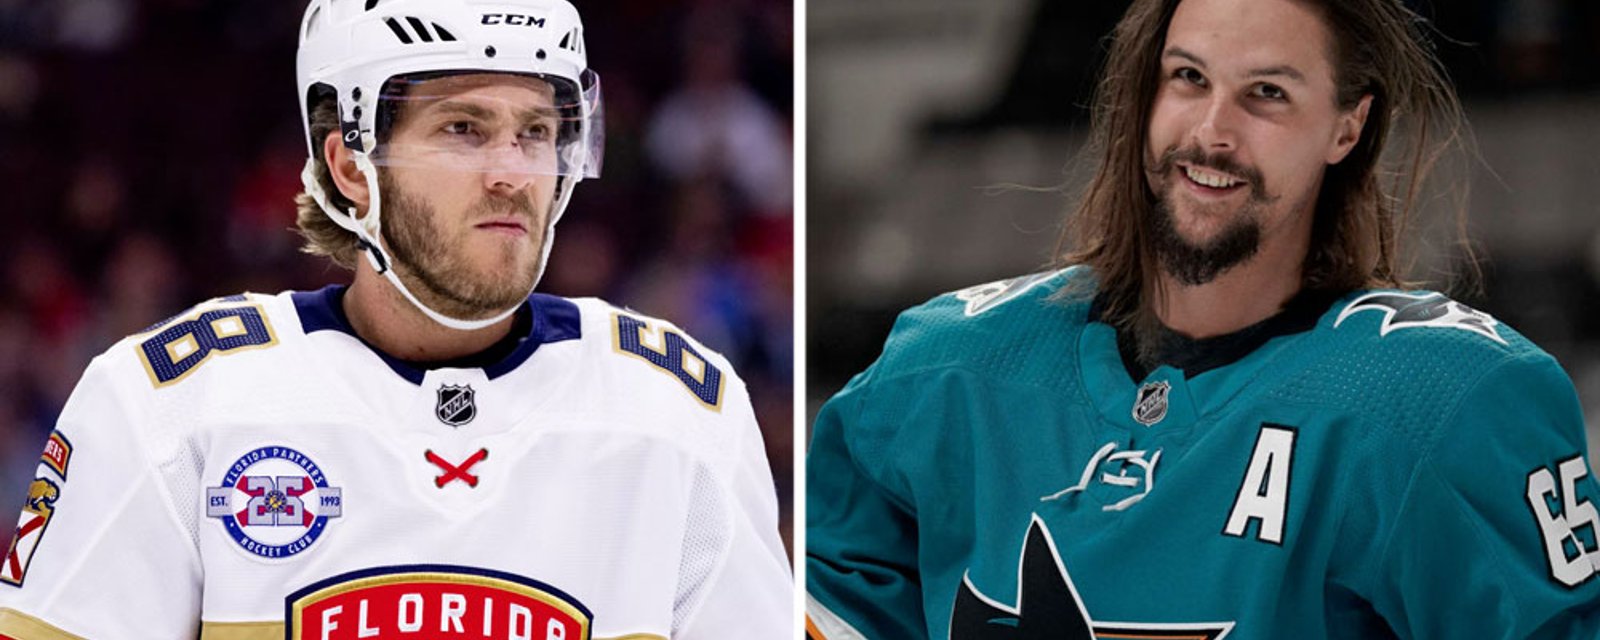 Report: Hoffman calls out Karlsson for chickening out of fight on Sunday night